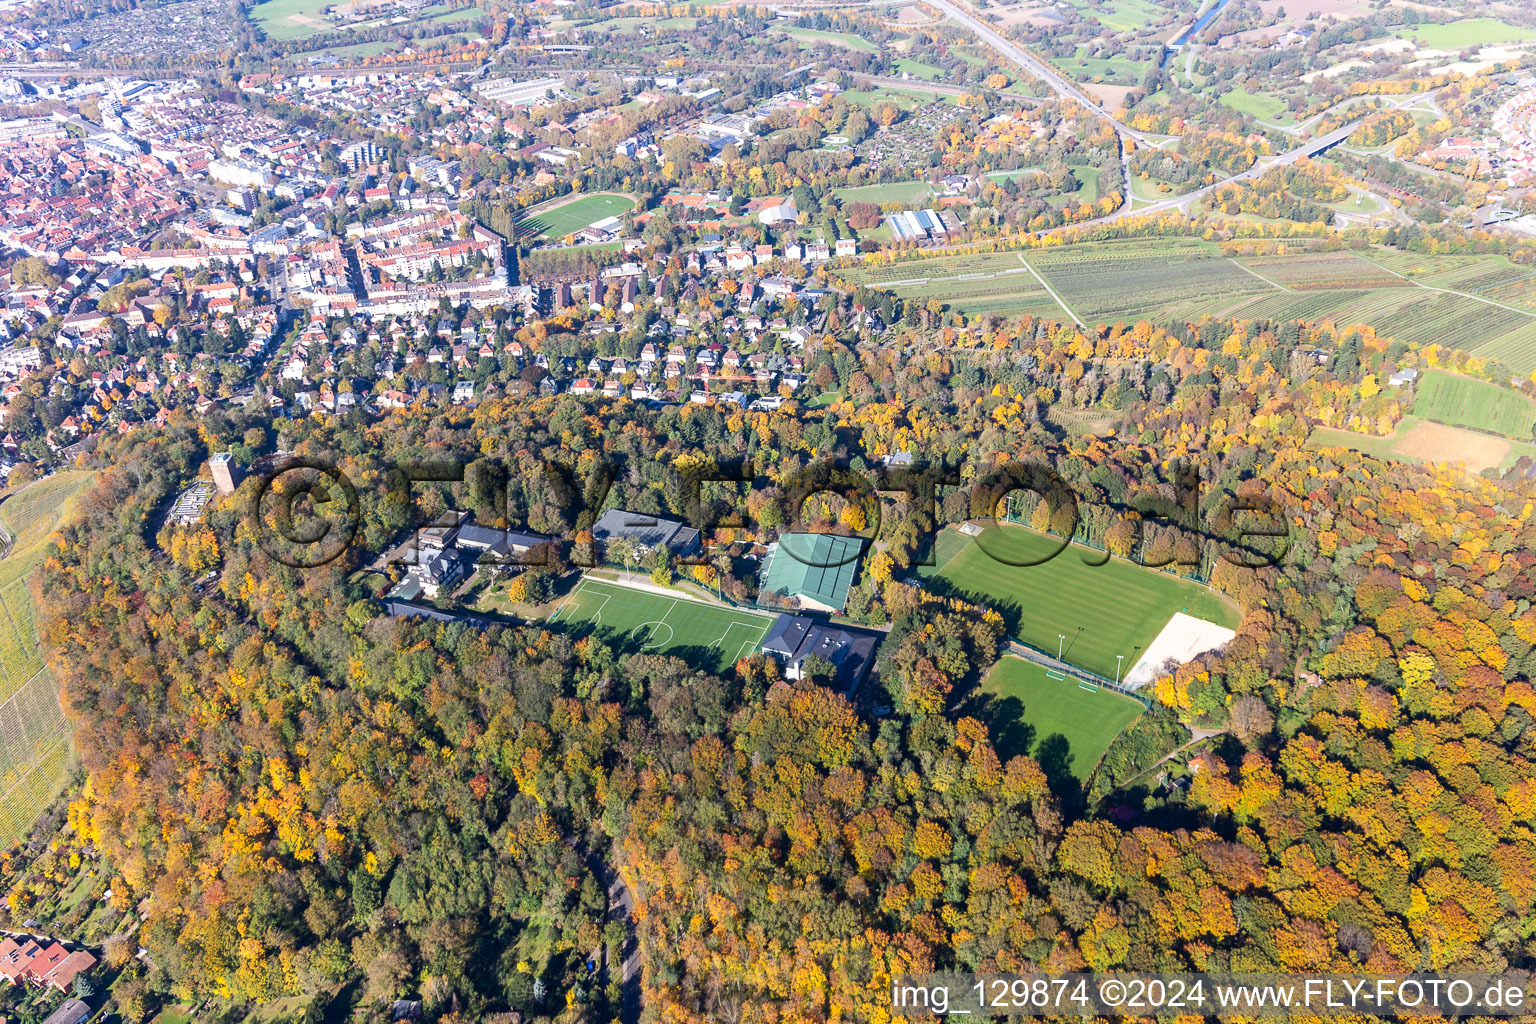 Sports grounds and football pitch of Sportschule Schoeneck - national soccer training center on the Turmberg in the district Durlach in Karlsruhe in the state Baden-Wuerttemberg